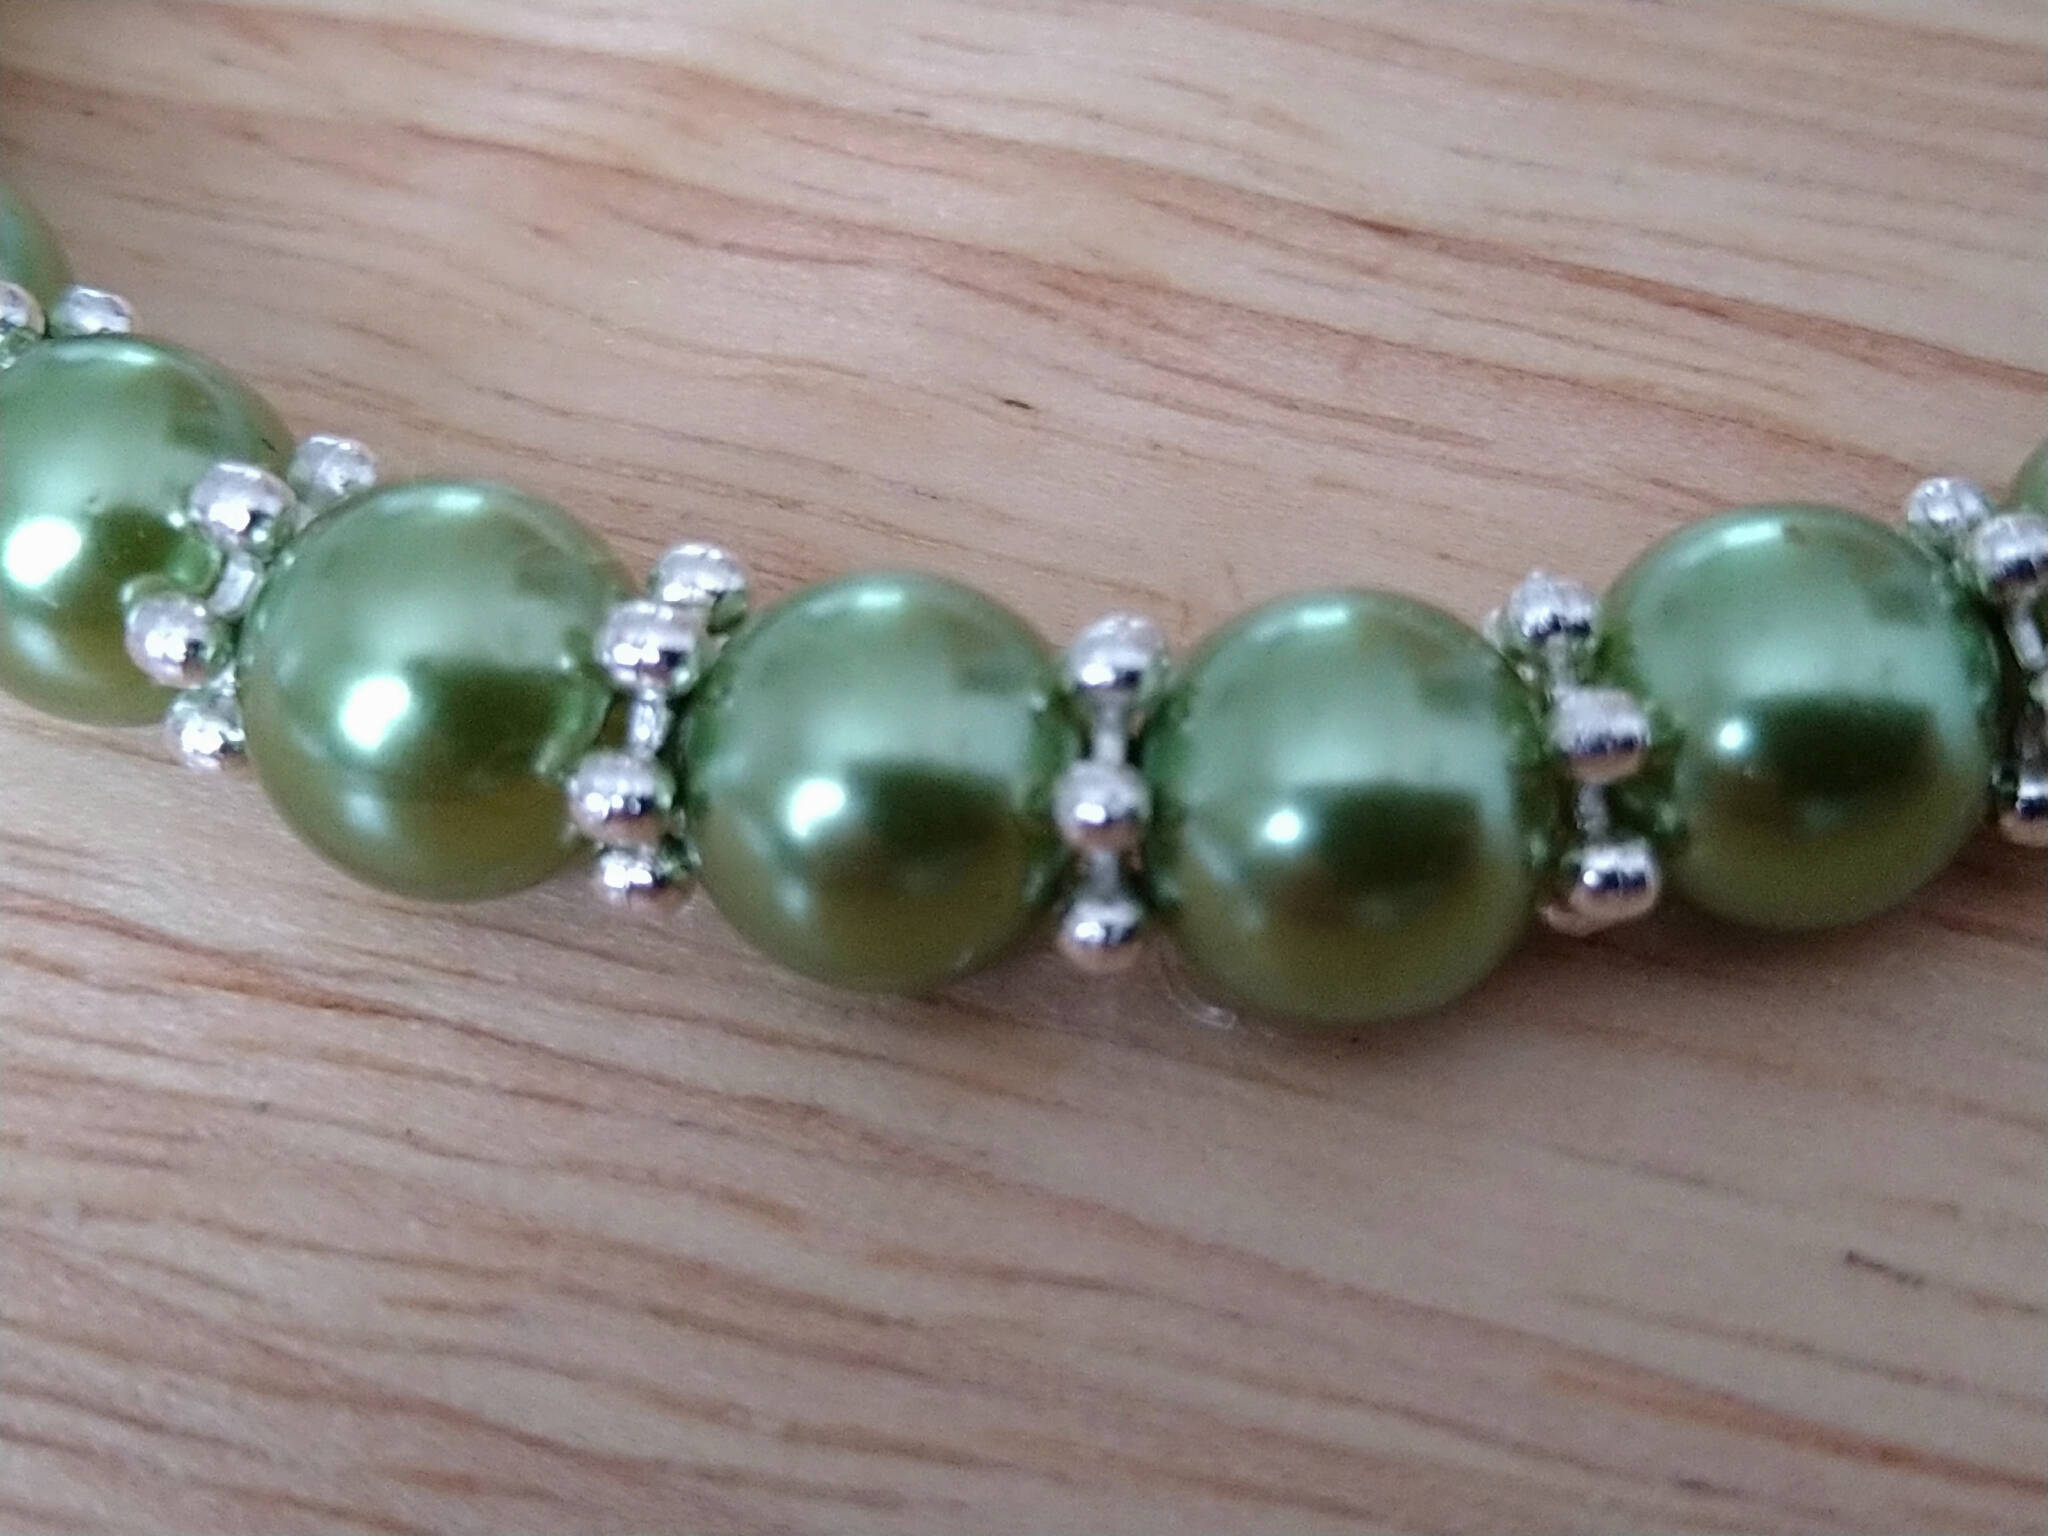 Green bracelet with silver coloured daisy spacers. Recycled beads